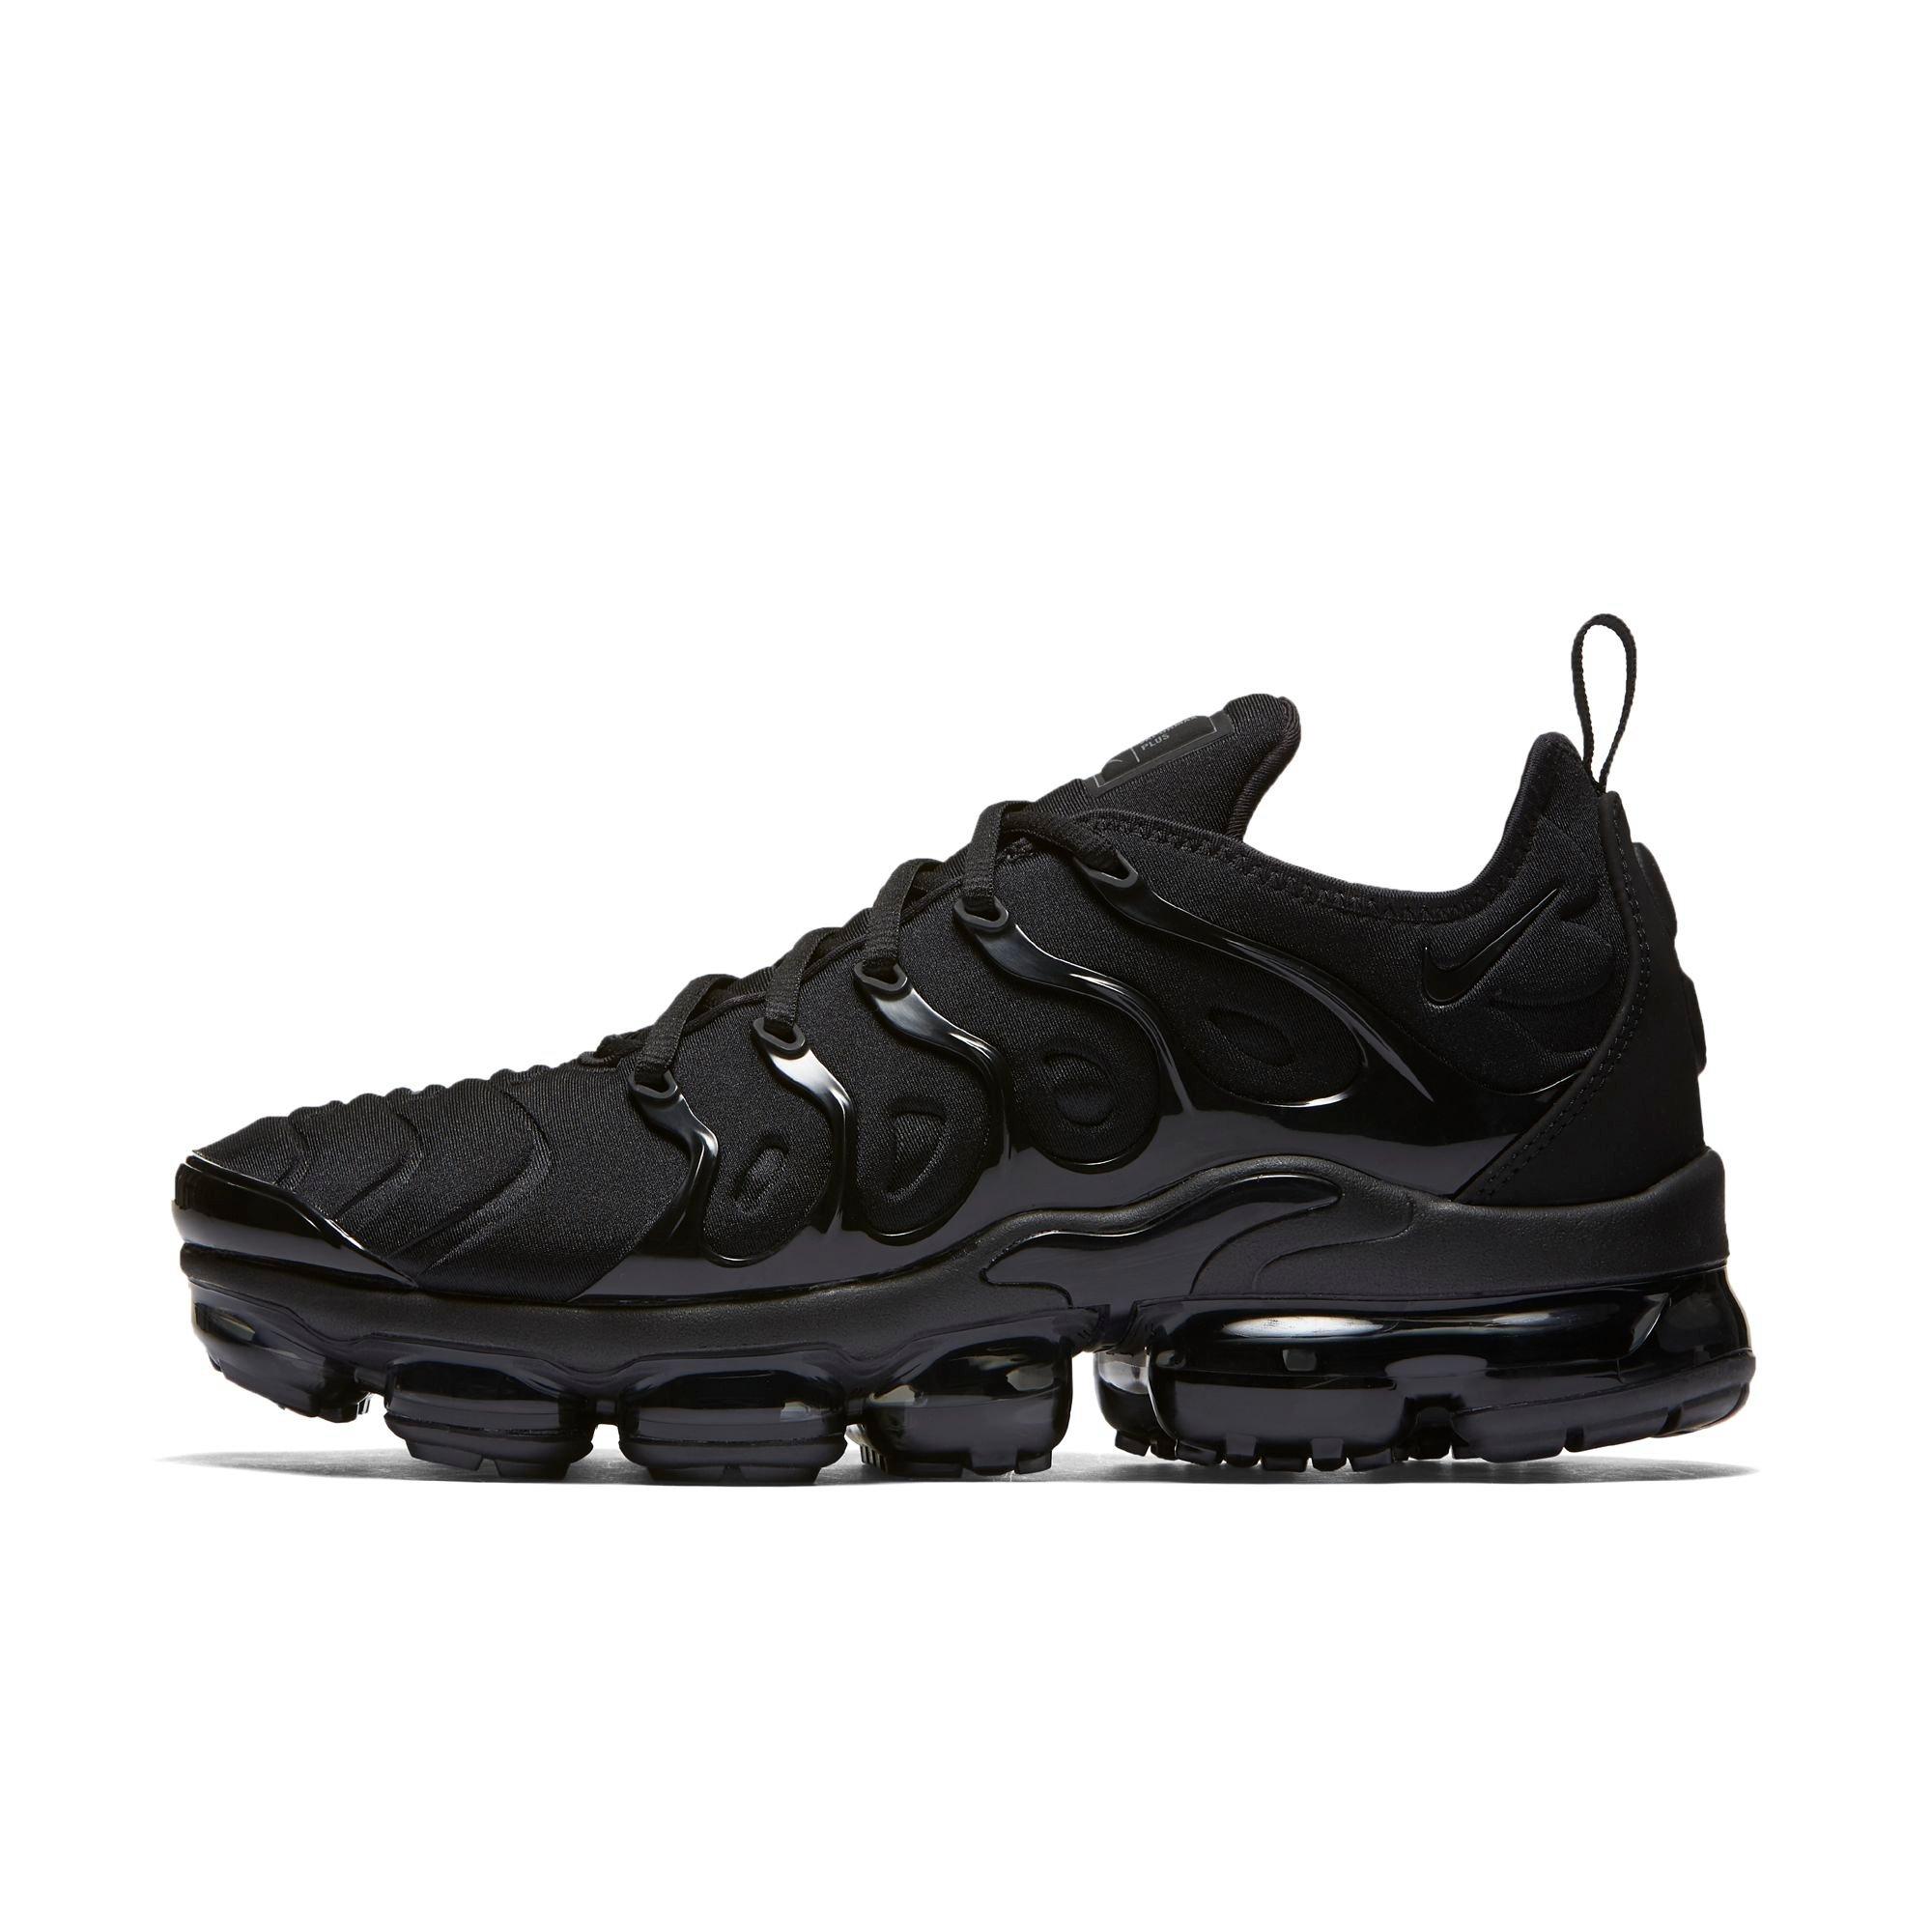 Outfit ideas - How to wear NIKE AIR VAPORMAX PLUS (BLACK/BLACK